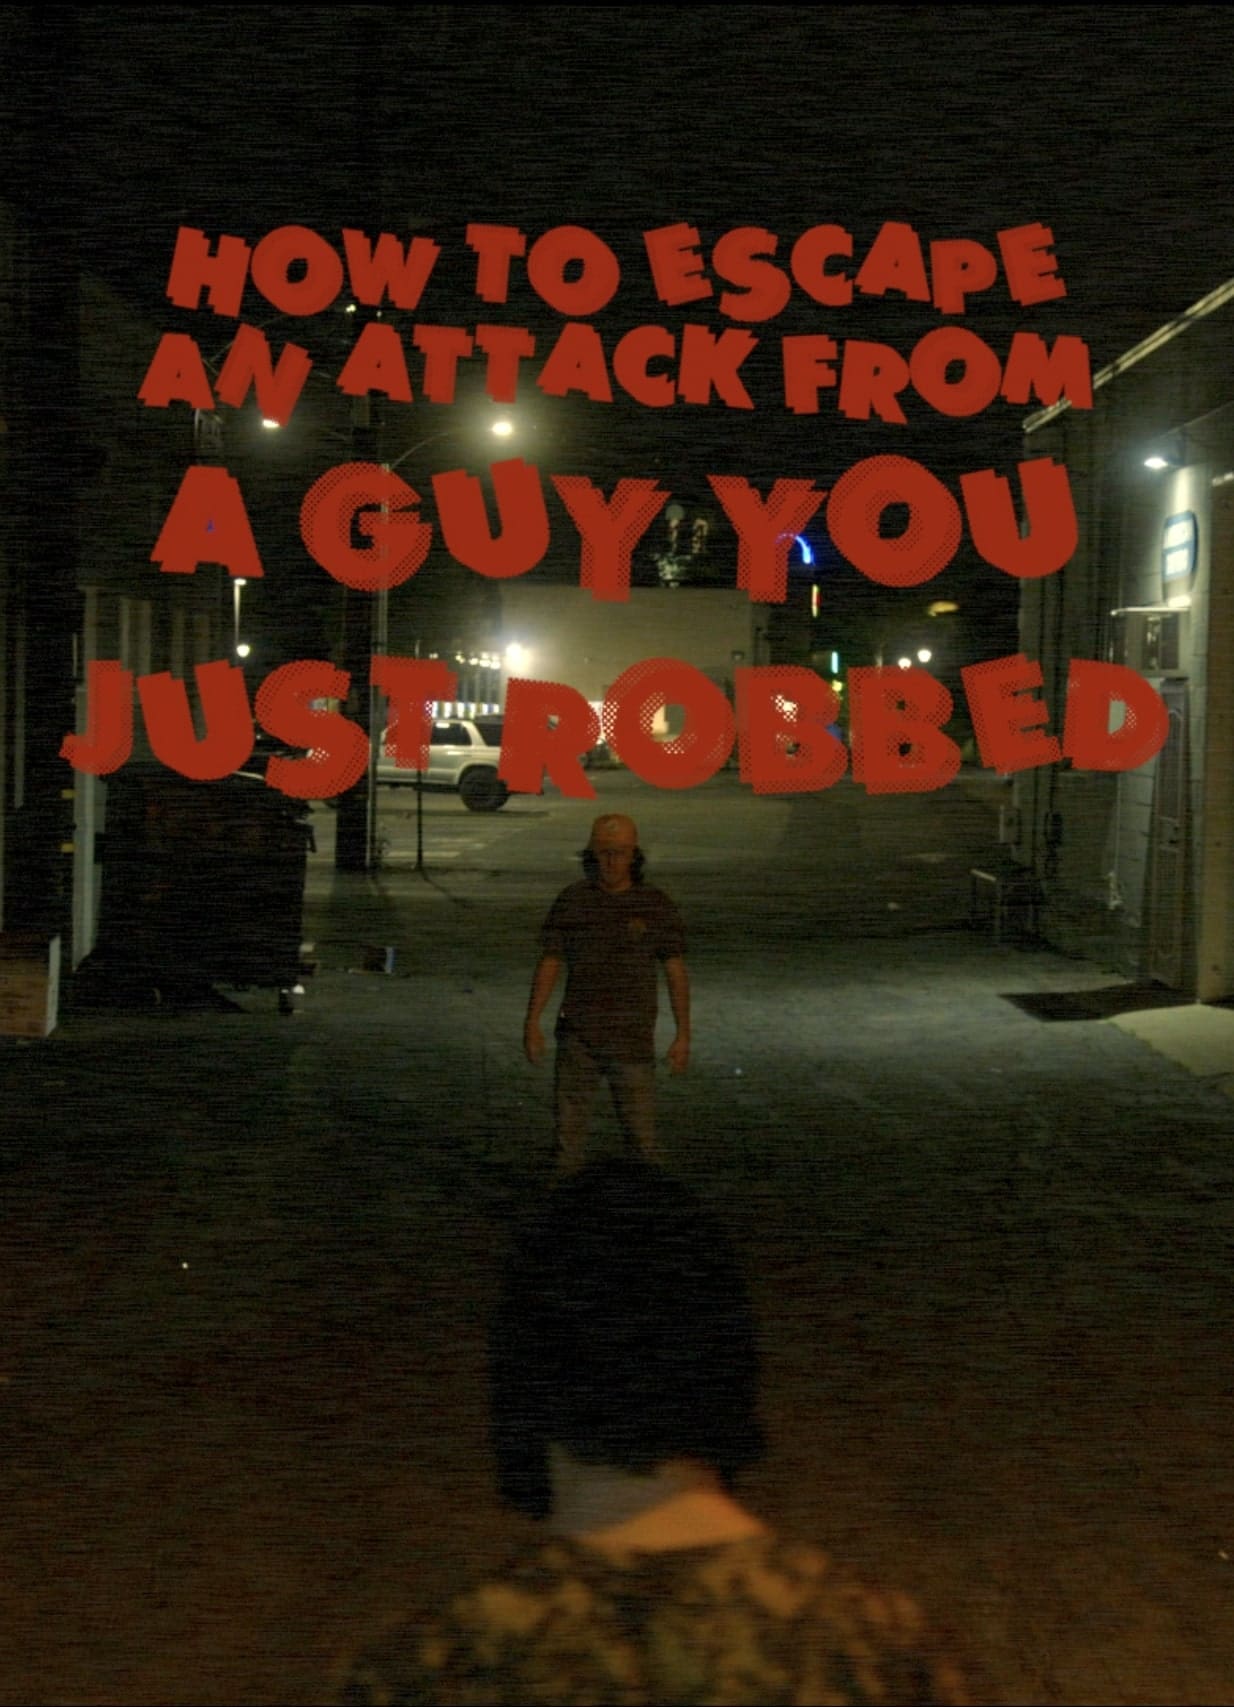 How To Escape An Attack From A Guy You Just Robbed